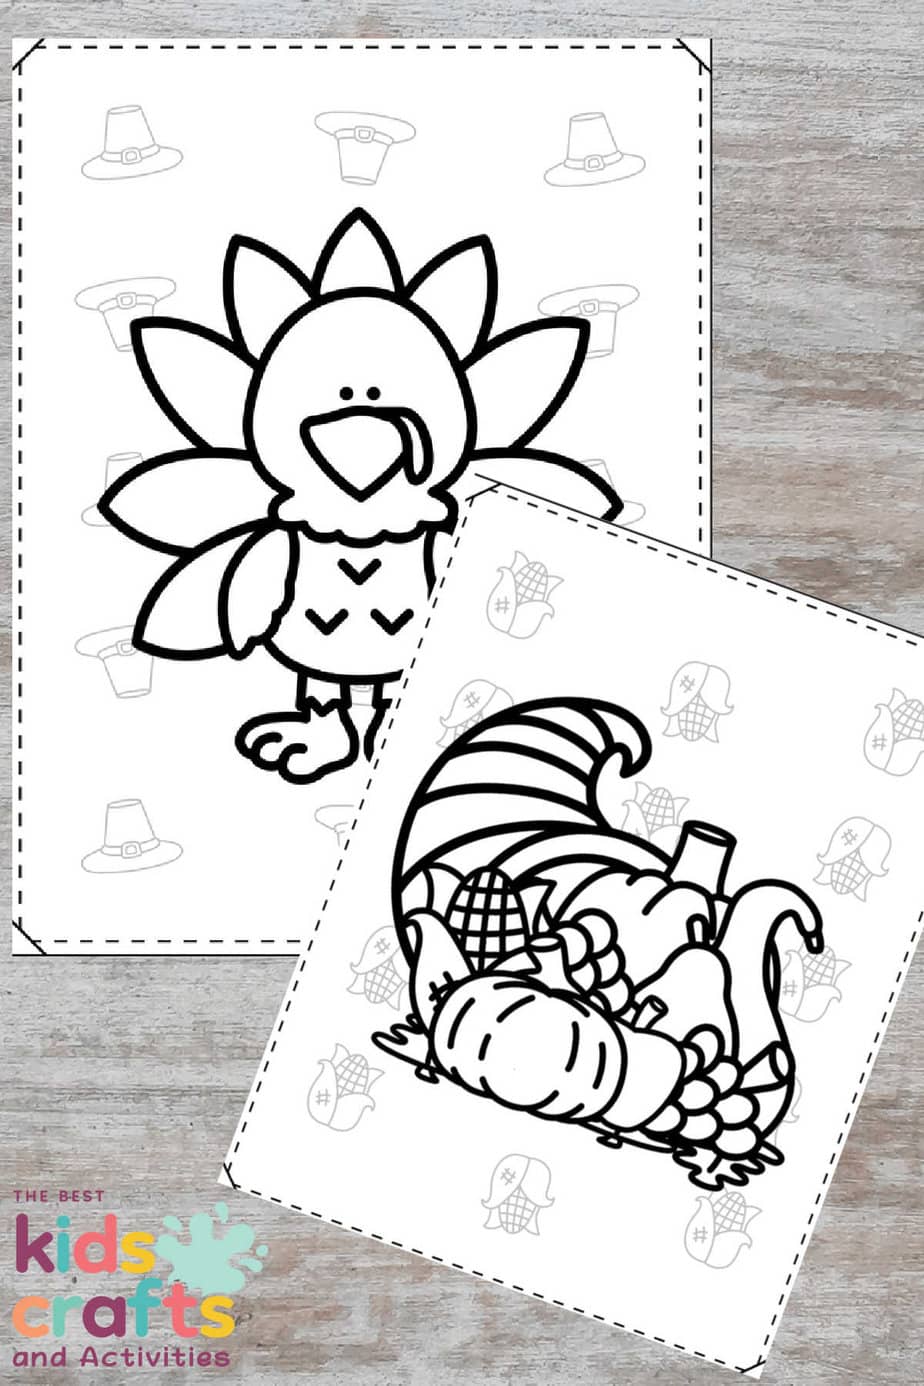 Thanksgiving coloring pages printable for kids â the best kids crafts and activities